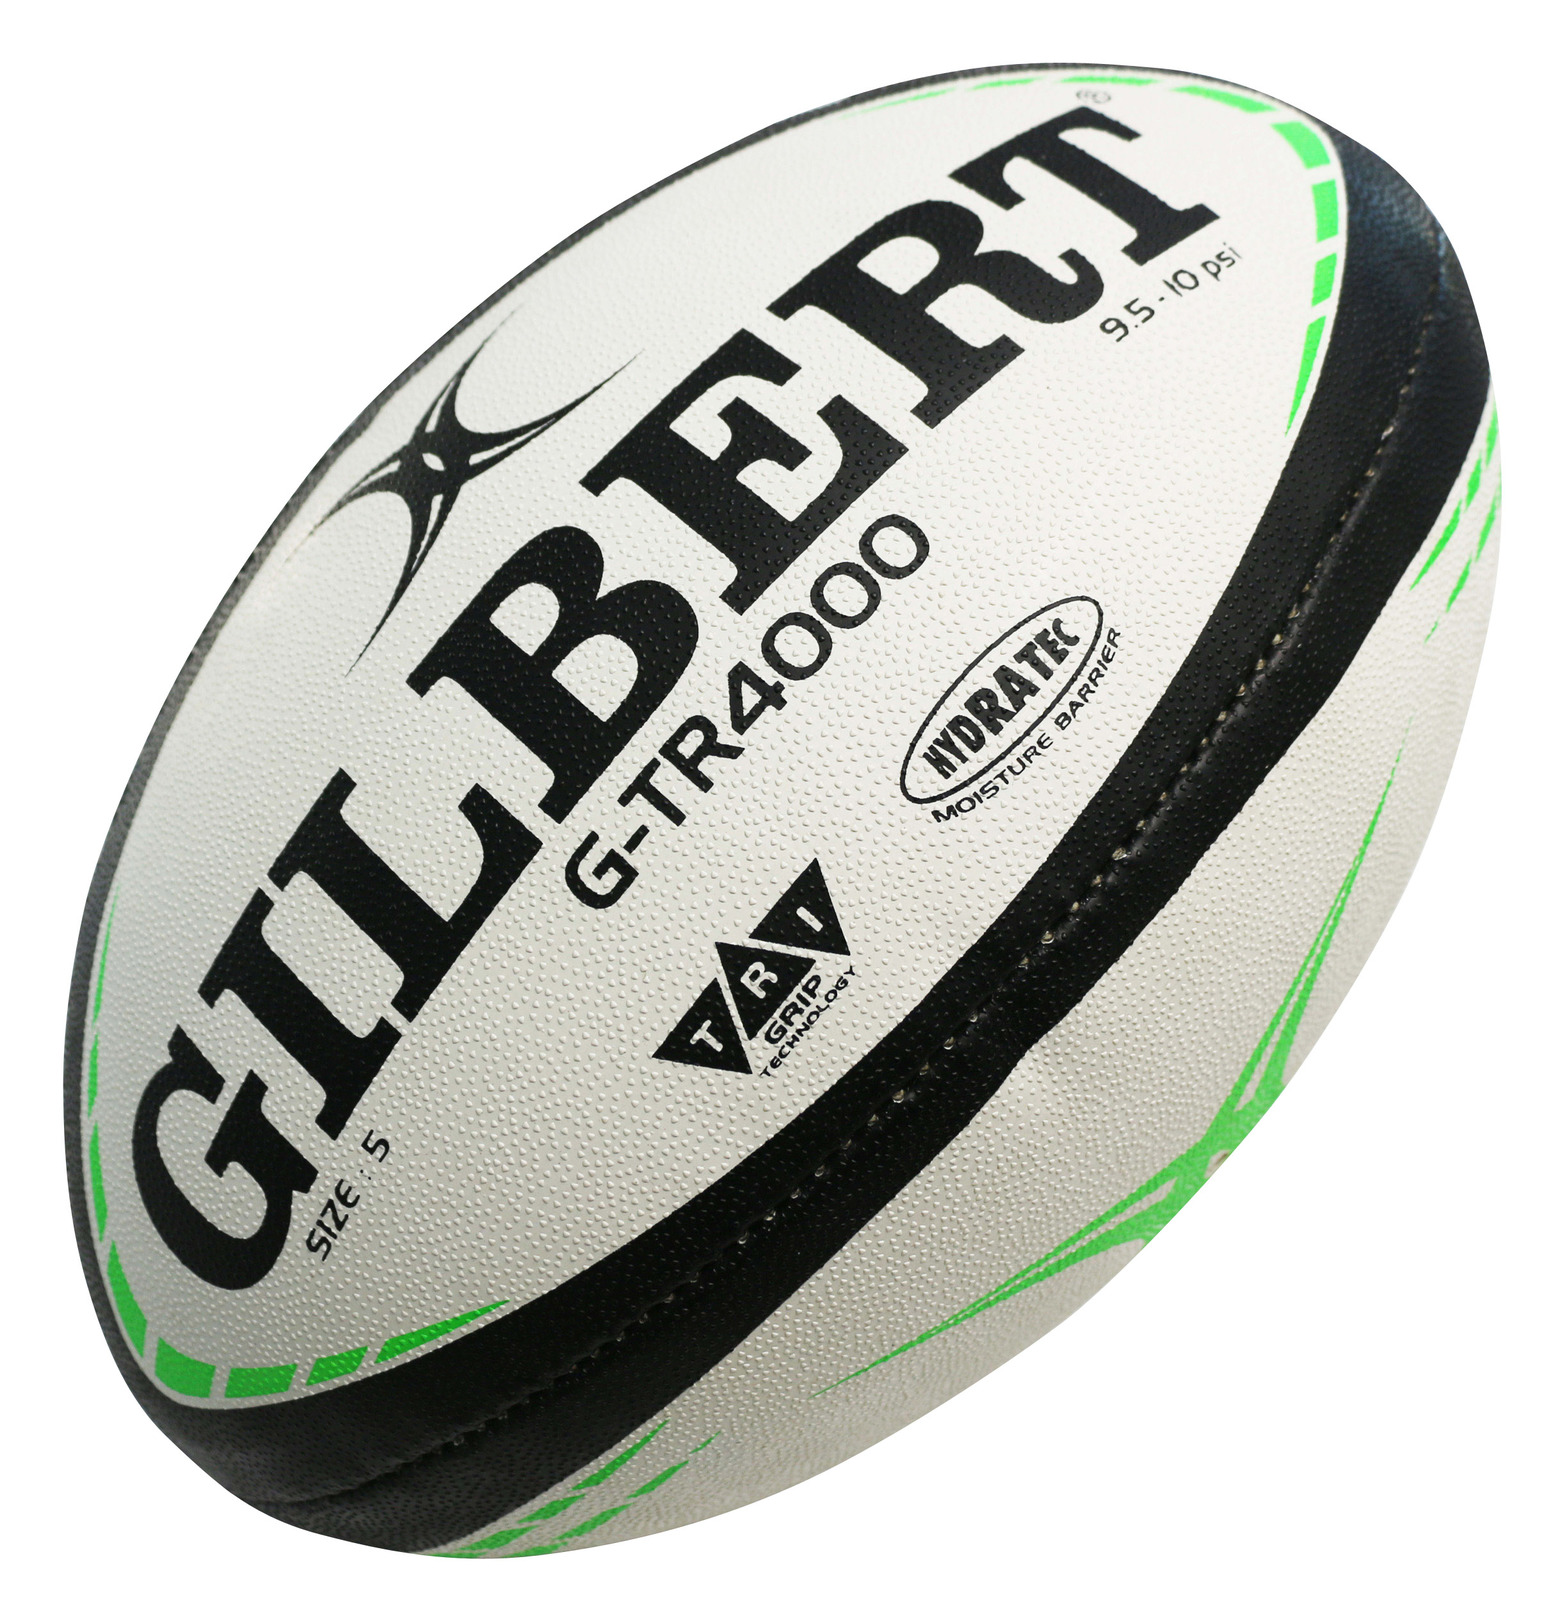 Gilbert G TR4000 Rugby Union Ball  For Sale BallSports 